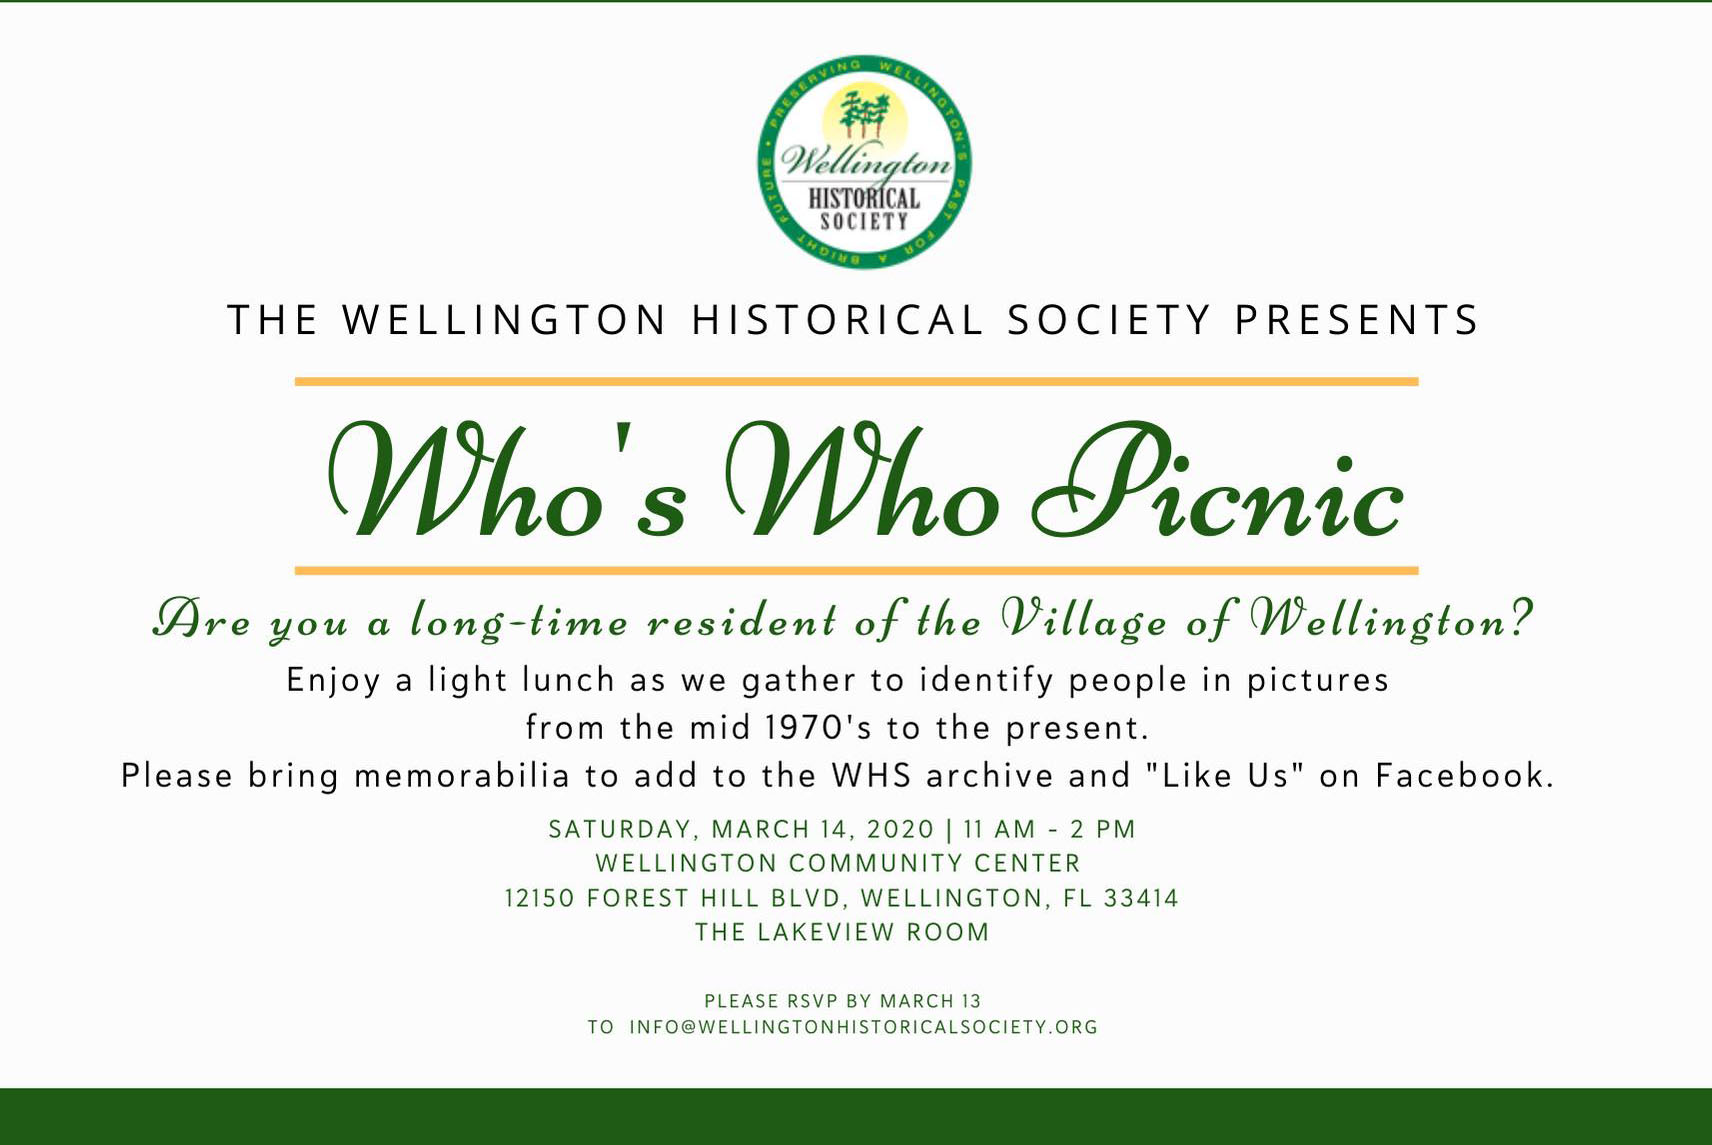 Who’s Who Picnic – POSTPONED